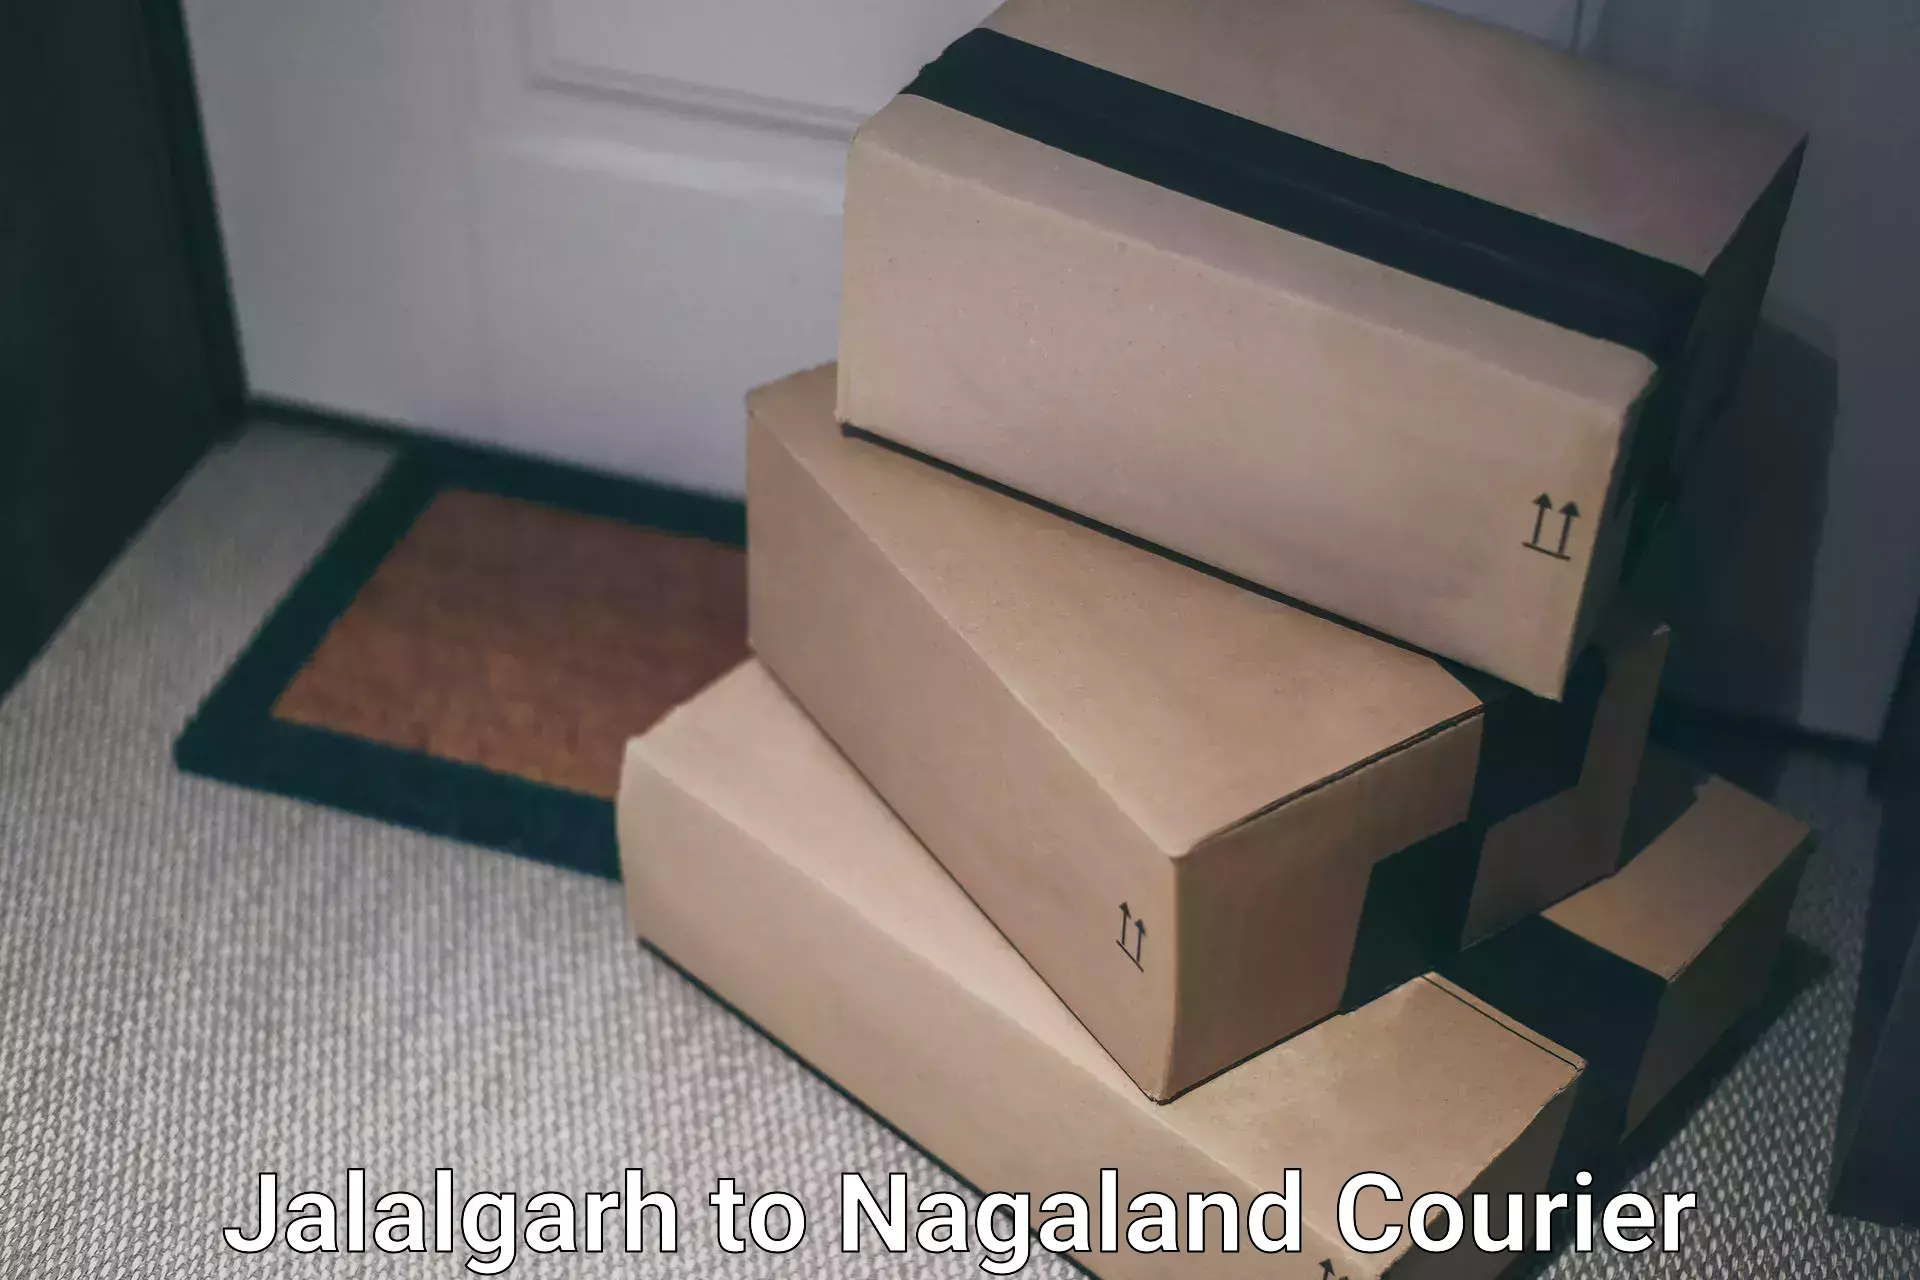 Professional parcel services in Jalalgarh to Nagaland